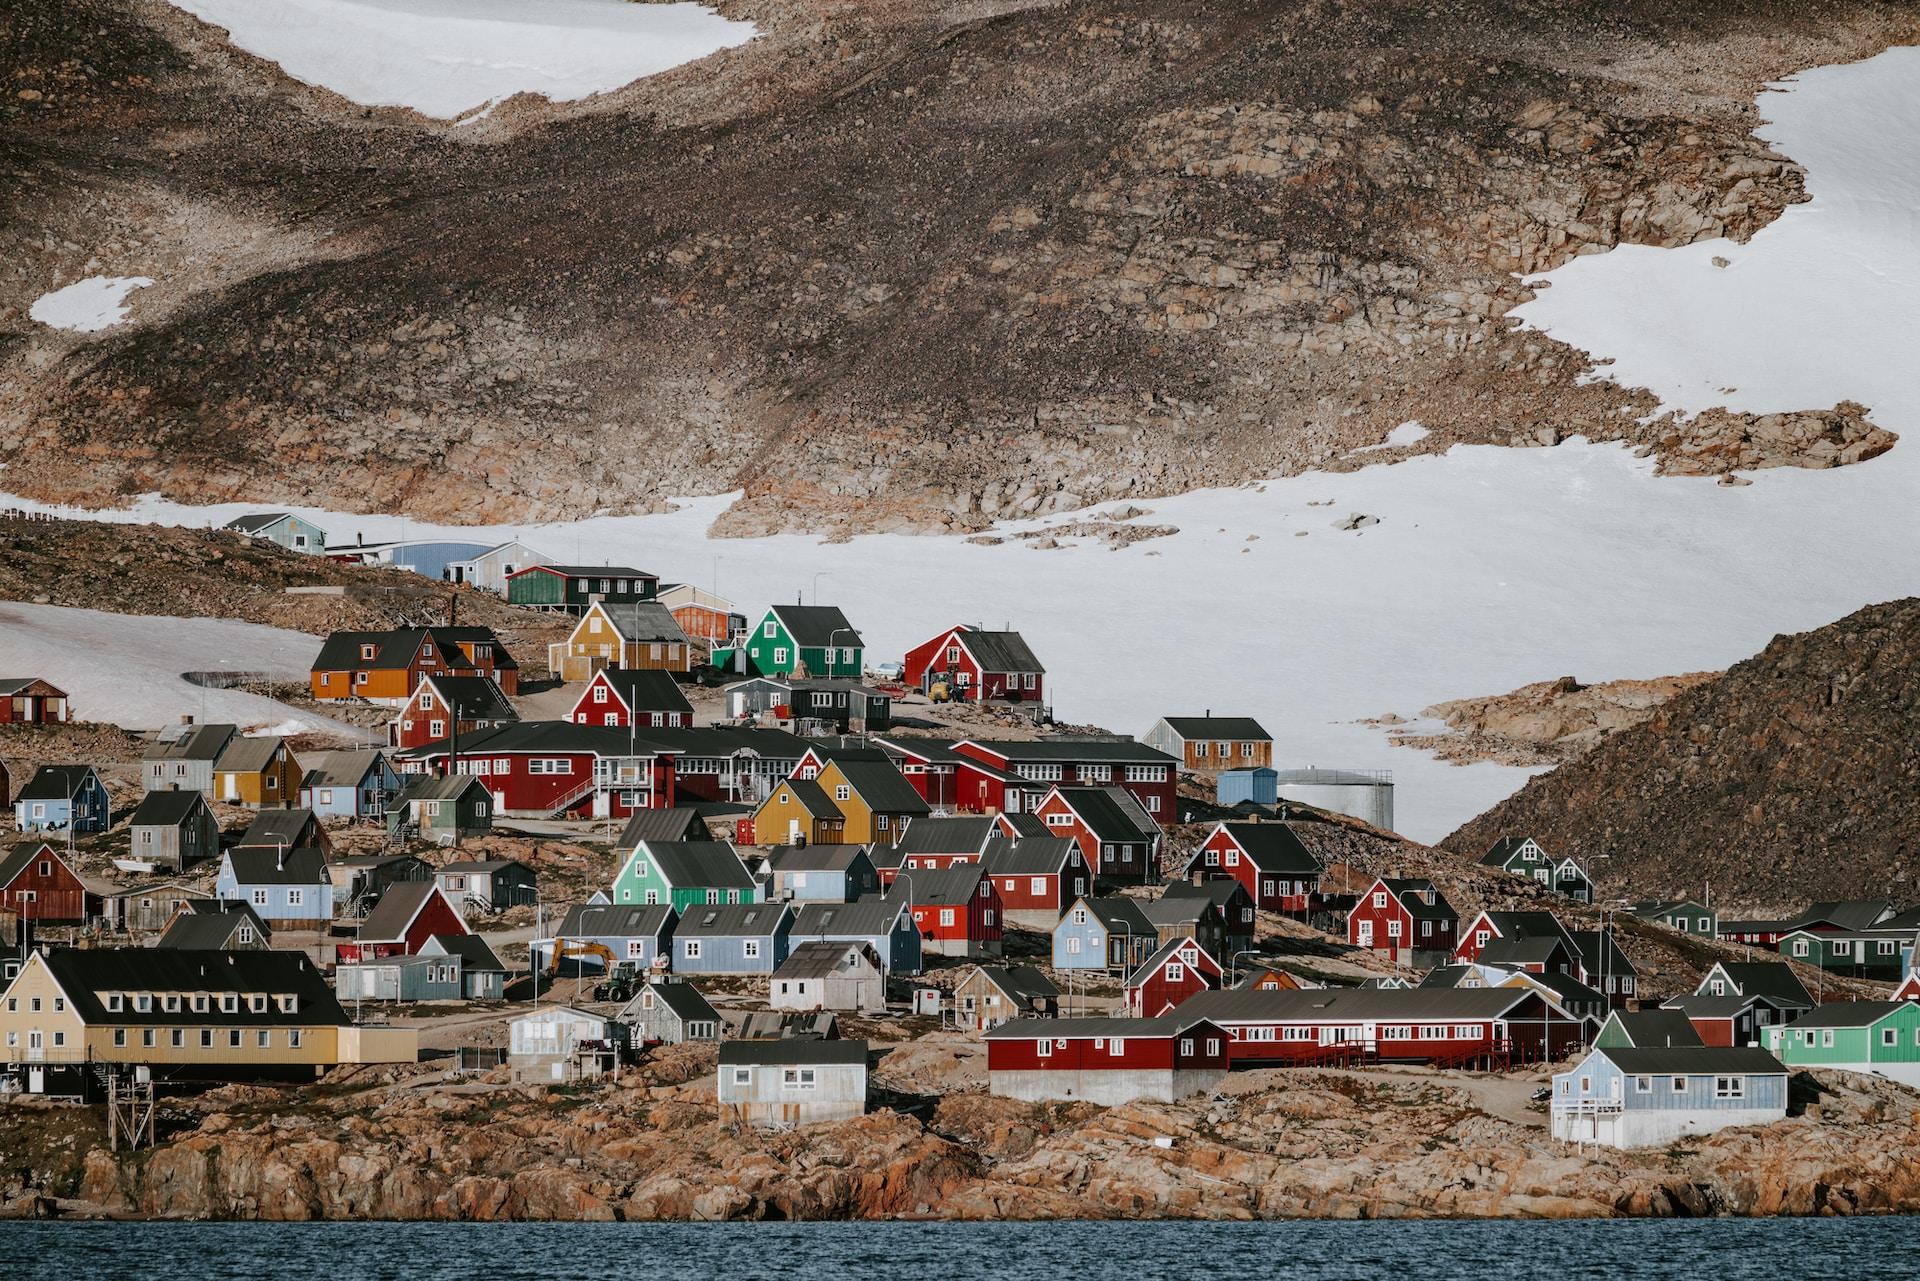 What It's Like to Visit Nuuk